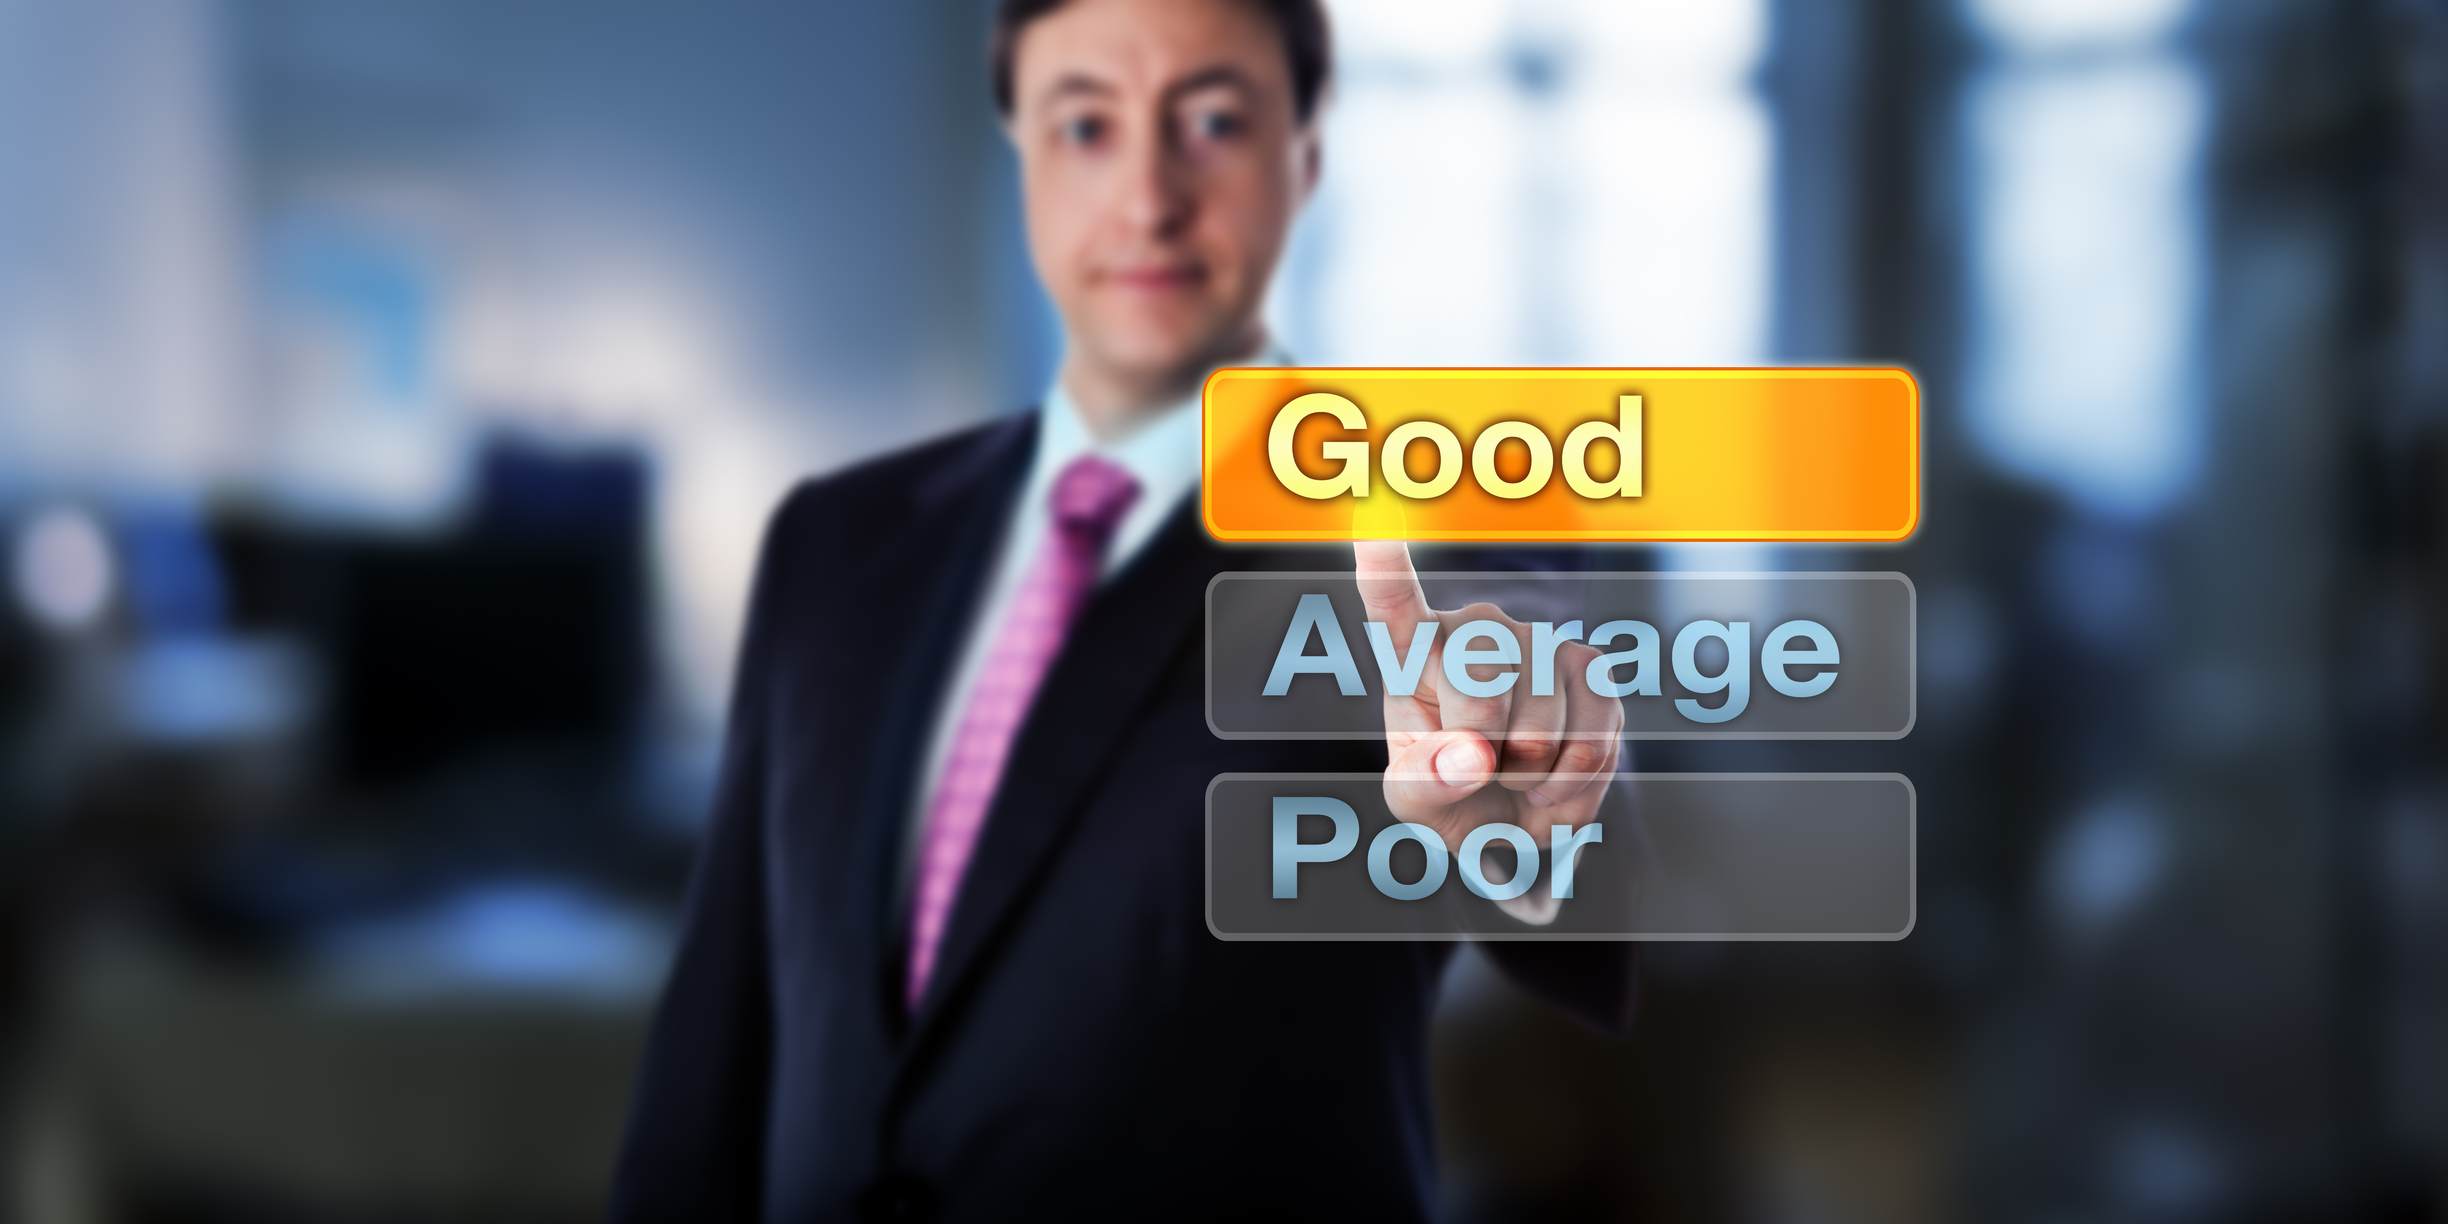 Man pointing at a 'good' sign, with average and poor underneath